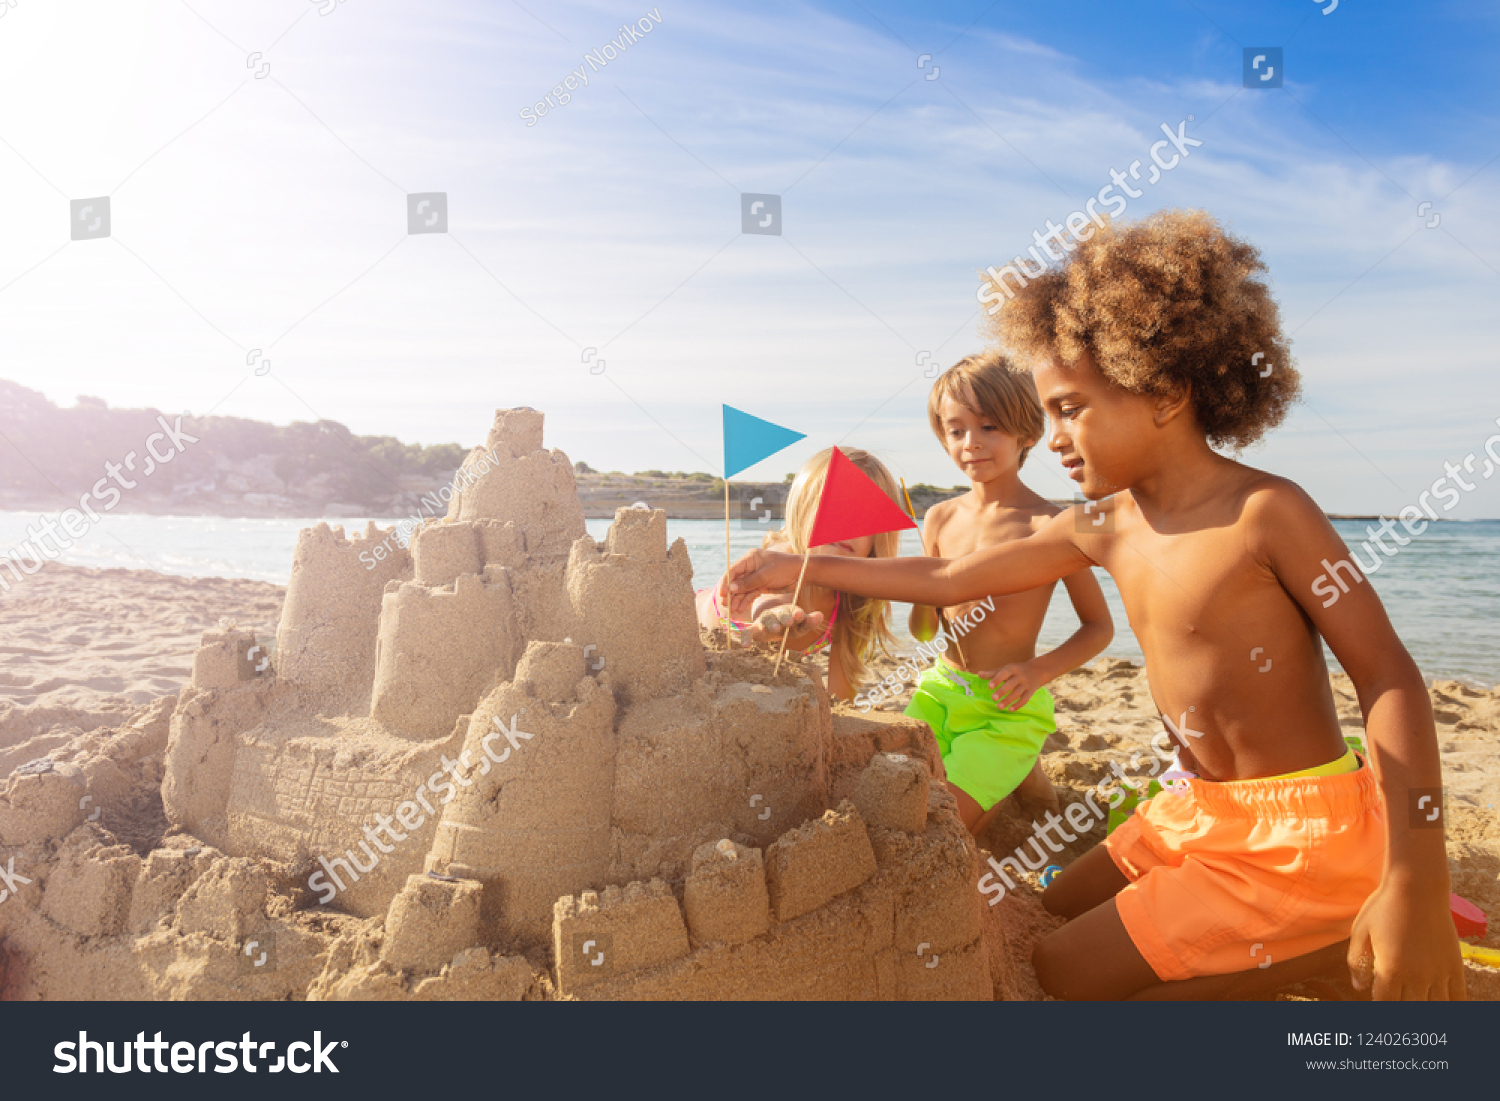 Happy kids decorating sandcastle towers with flags #1240263004